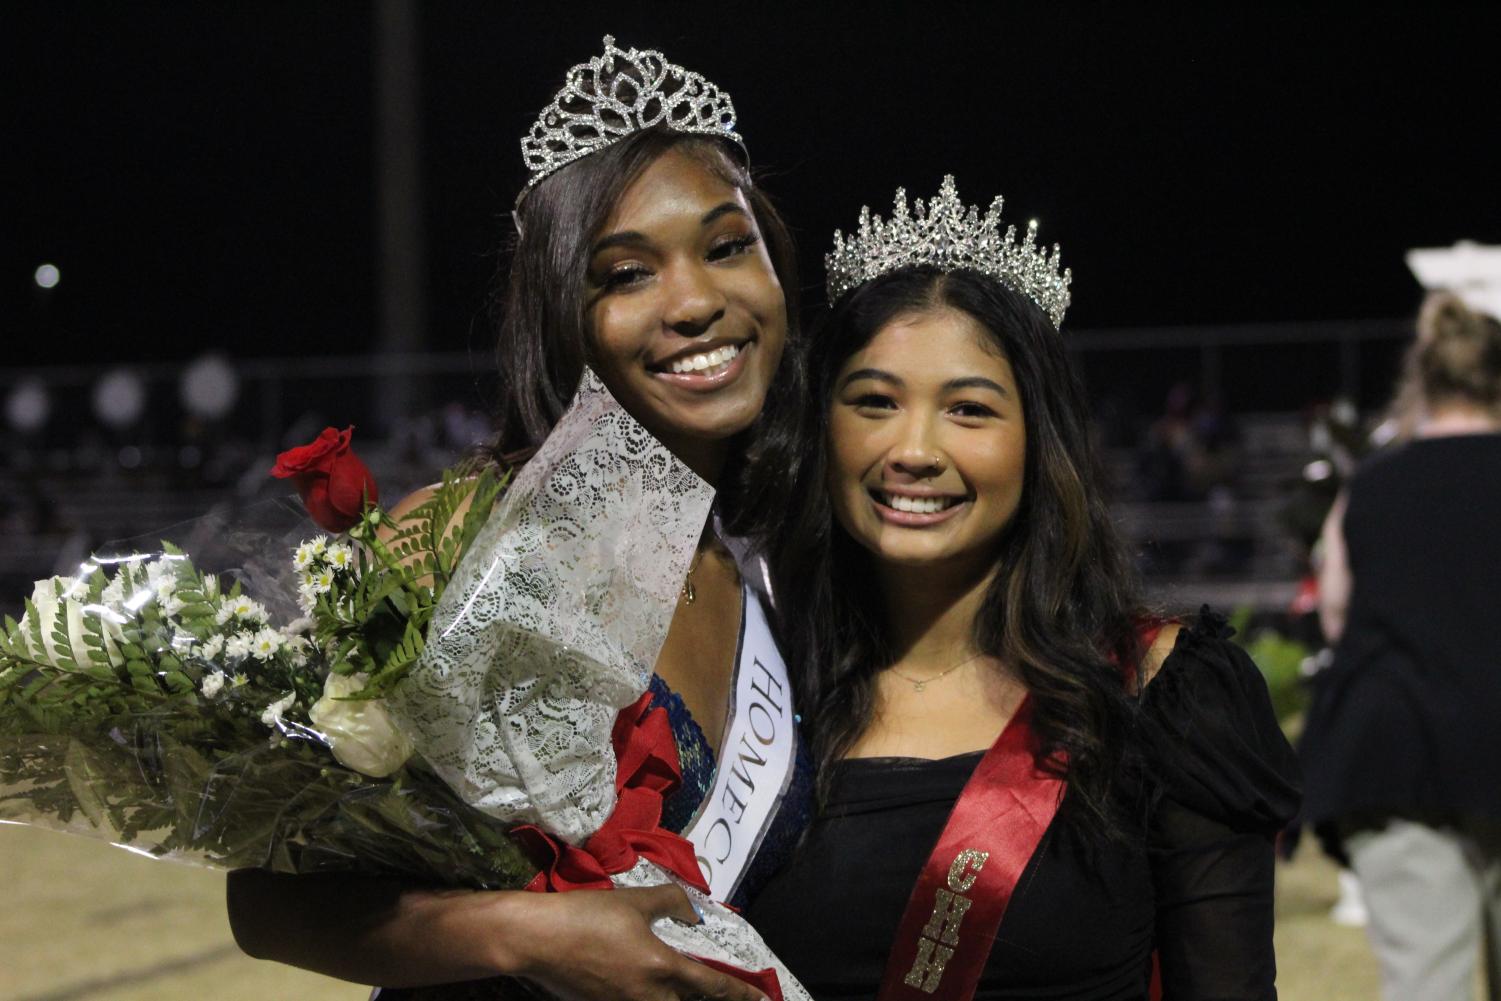 Shainah+Walker+crowned+new+Homecoming+Queen+%7C+Homecoming+Court+2022+%7C+Slideshow